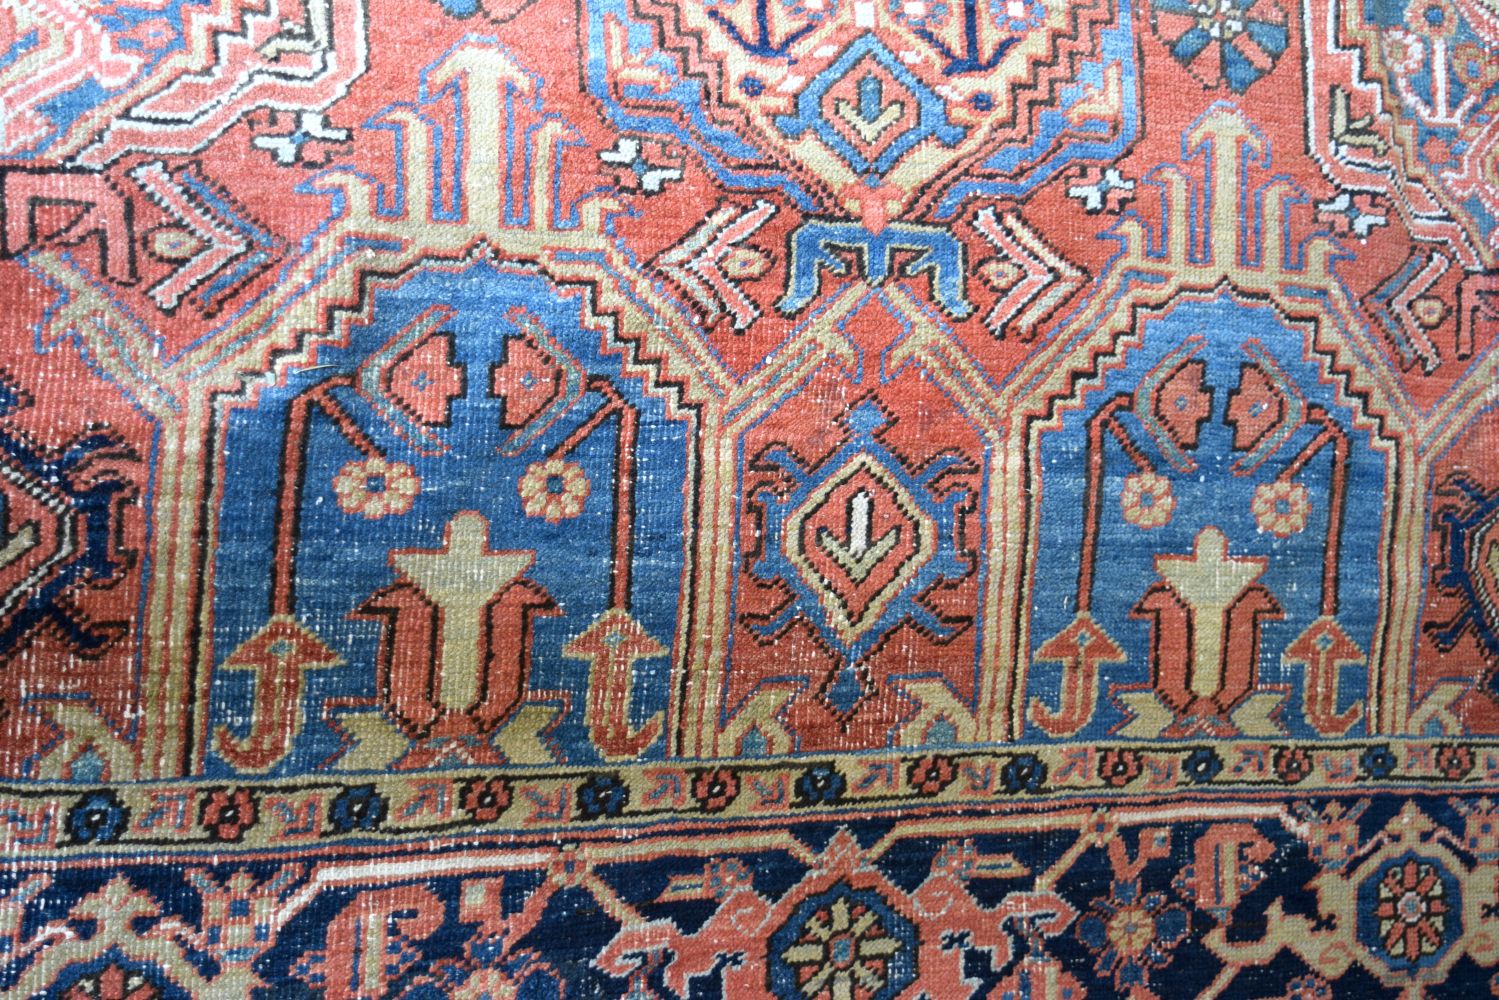 AN ANTIQUE MIDDLE EASTERN CARPET decorated with motifs on a red and blue ground. 300 cm x 195 cm. - Image 6 of 6